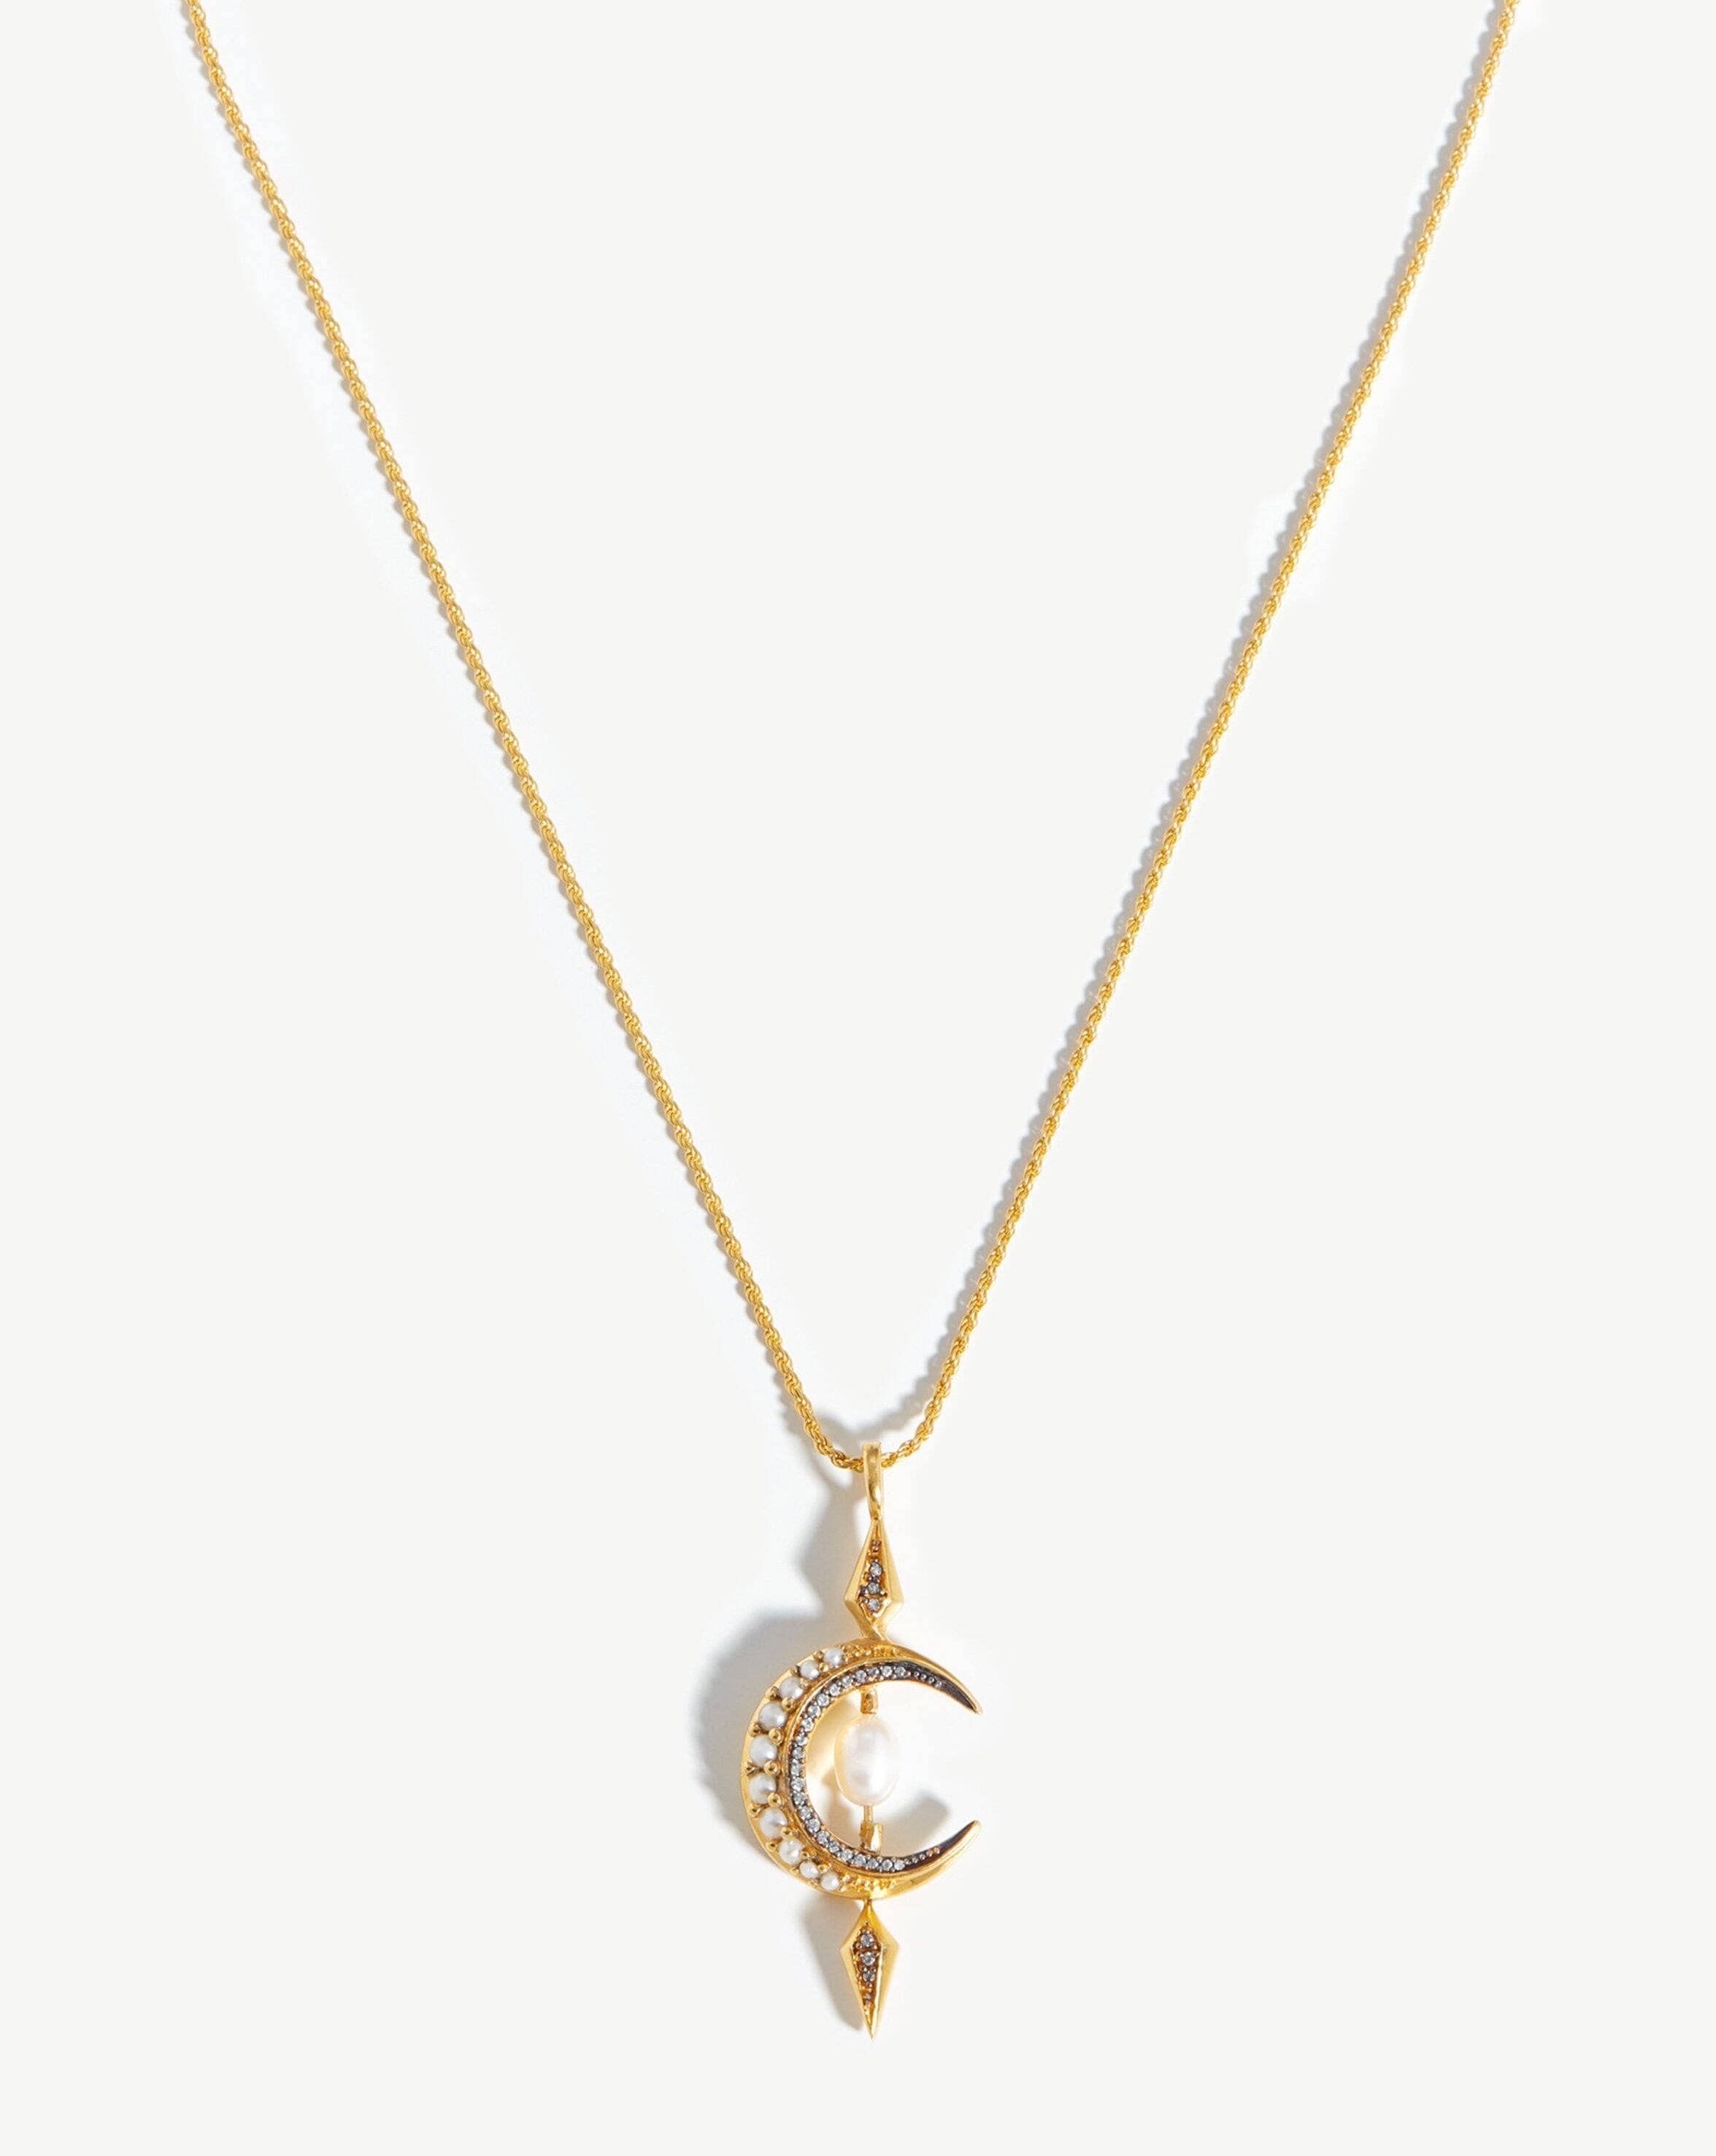 Gold Double Chain Necklace  Monte Carlo by Oomiay – Oomiay Jewelry